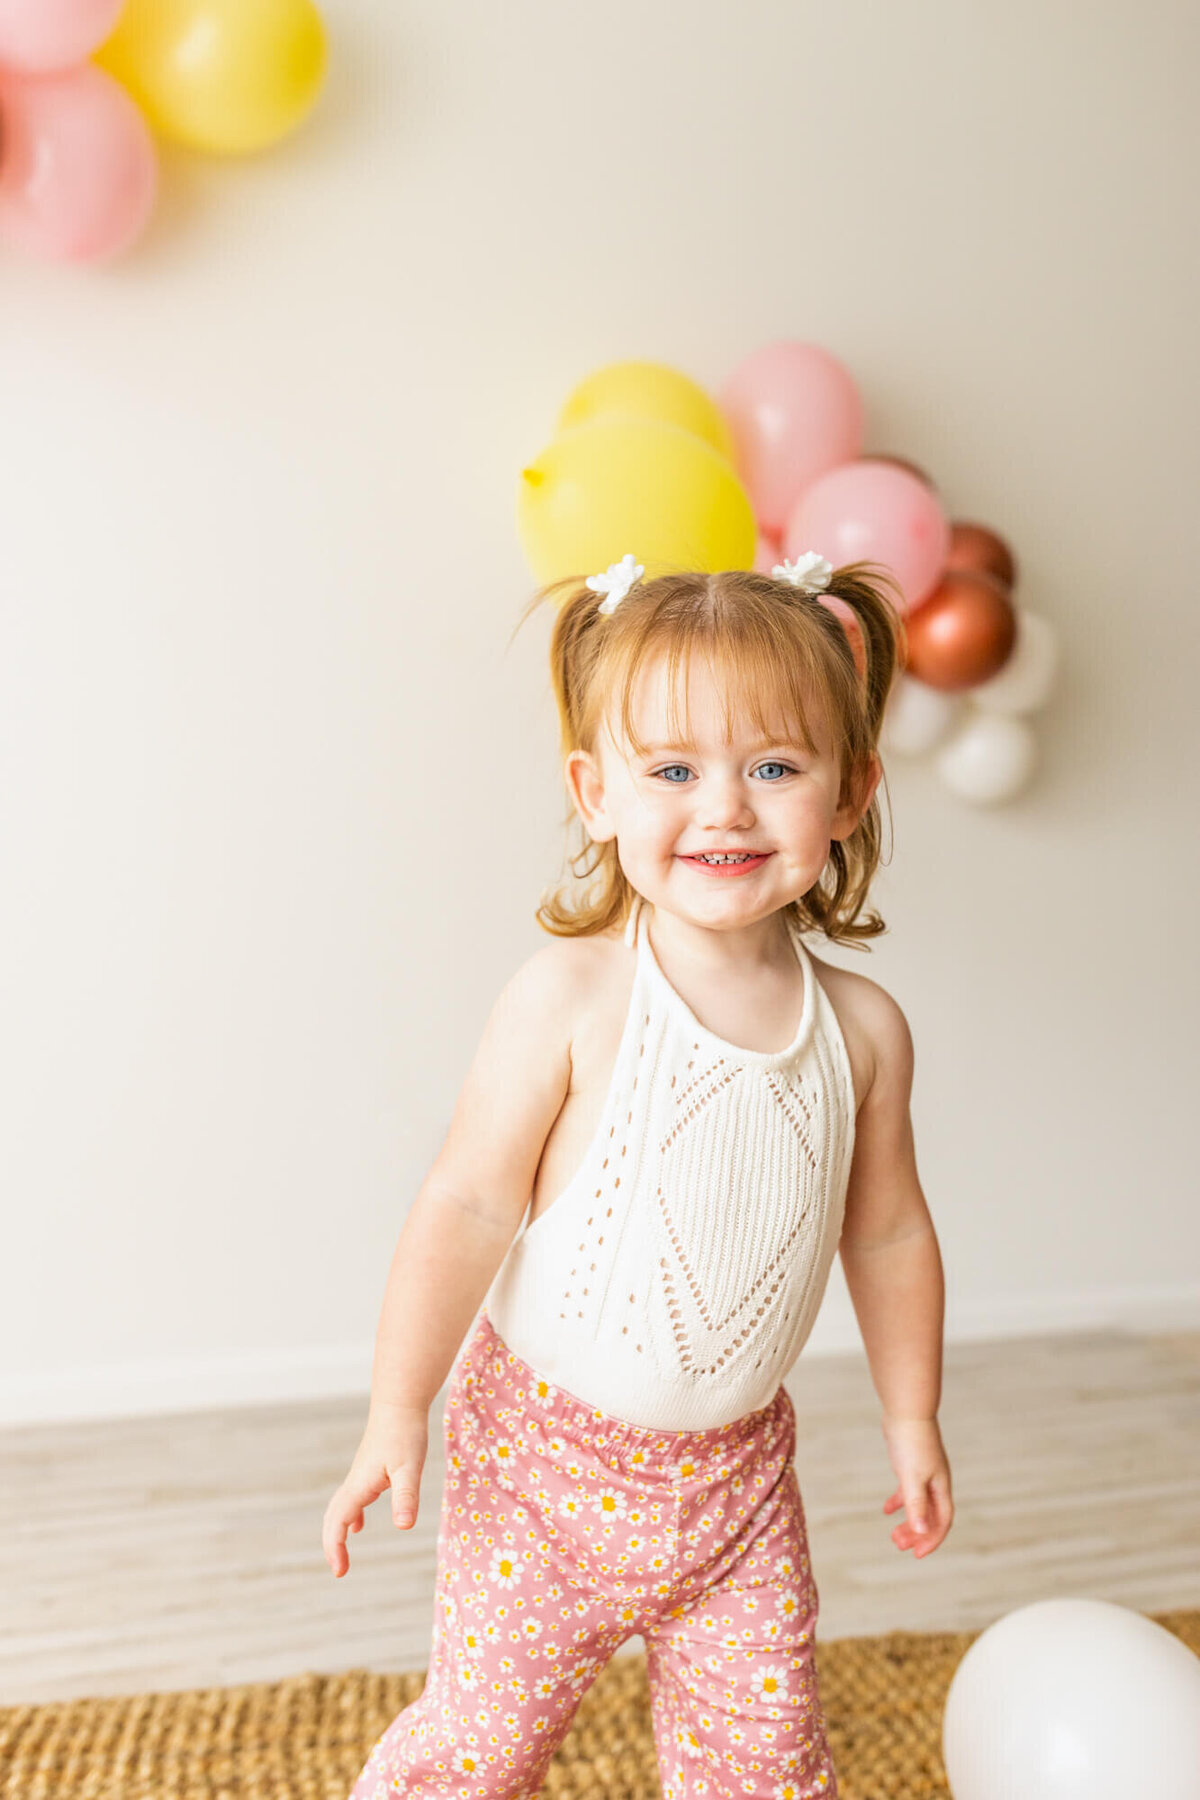 Toddler girl dresses in bell bottoms and a lace romper standing with colorful balloons and smiling